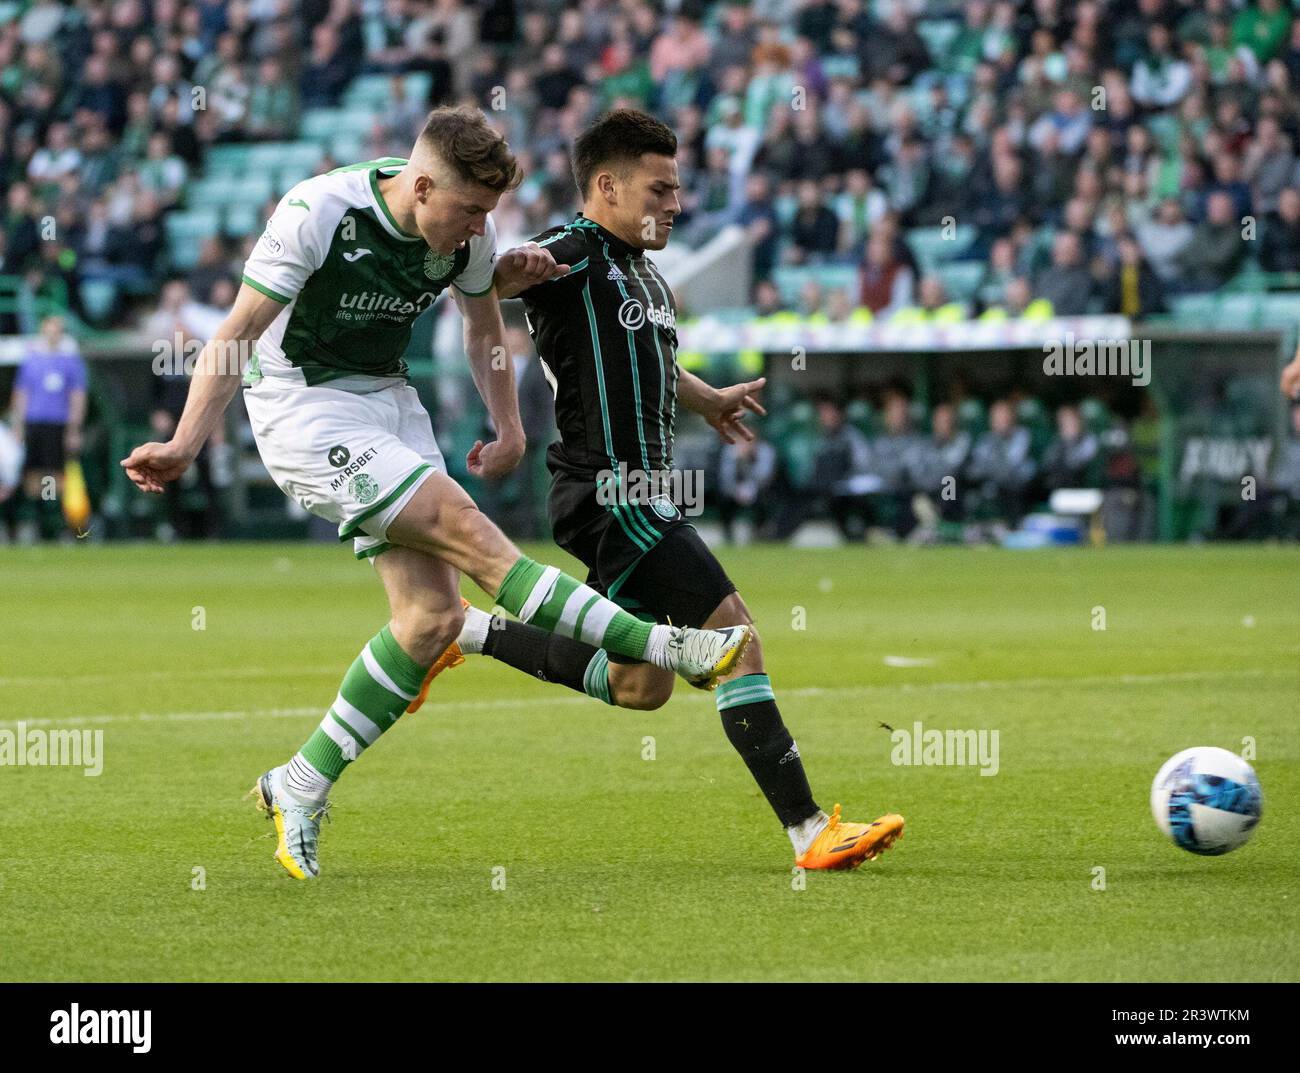 EDINBURGH, UK. 24th May, 2023. HibsÕ striker, Kevin Nisbet, manages to get his shot away despite the attention of Celtic forward, Liel Abada, during the match between Hibernian and Celtic in the cinch Premiership at Easter Road Stadium, Edinburgh, Midlothian, UK. 24/5/2023. Credit: Ian Jacobs/Alamy Live News Stock Photo